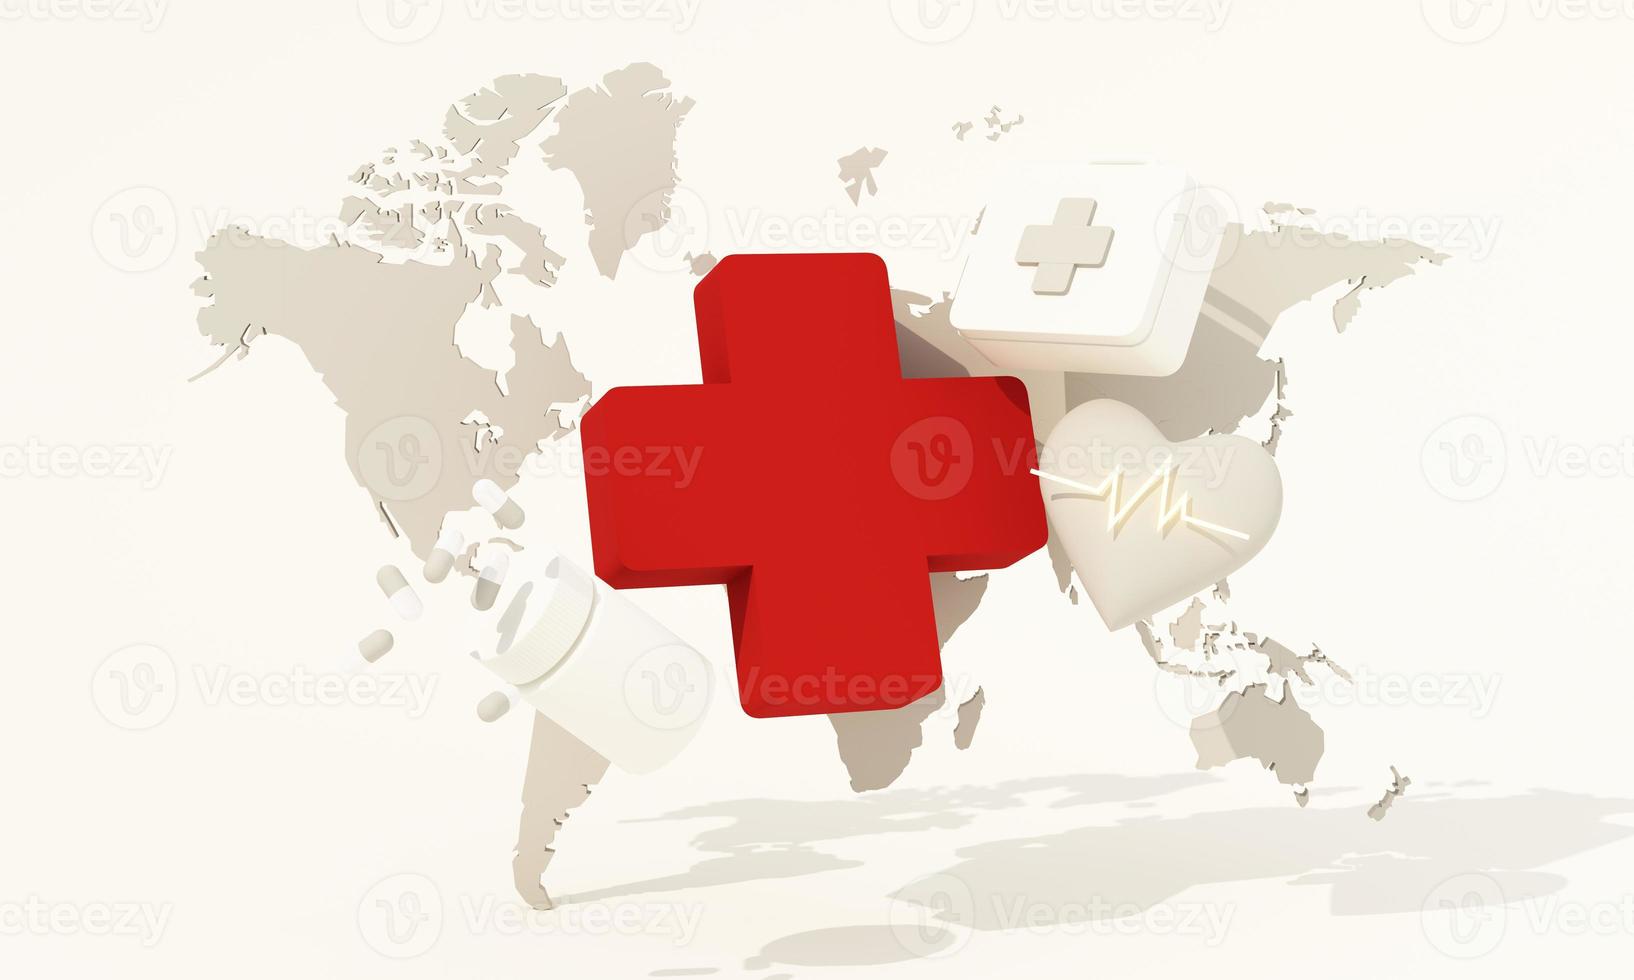 May 8th, World Red Cross symbol with globe on white background, and red paper people, low poly trees around the world, World Red Cross and red Crescent Day, insurance. realistic 3d render photo